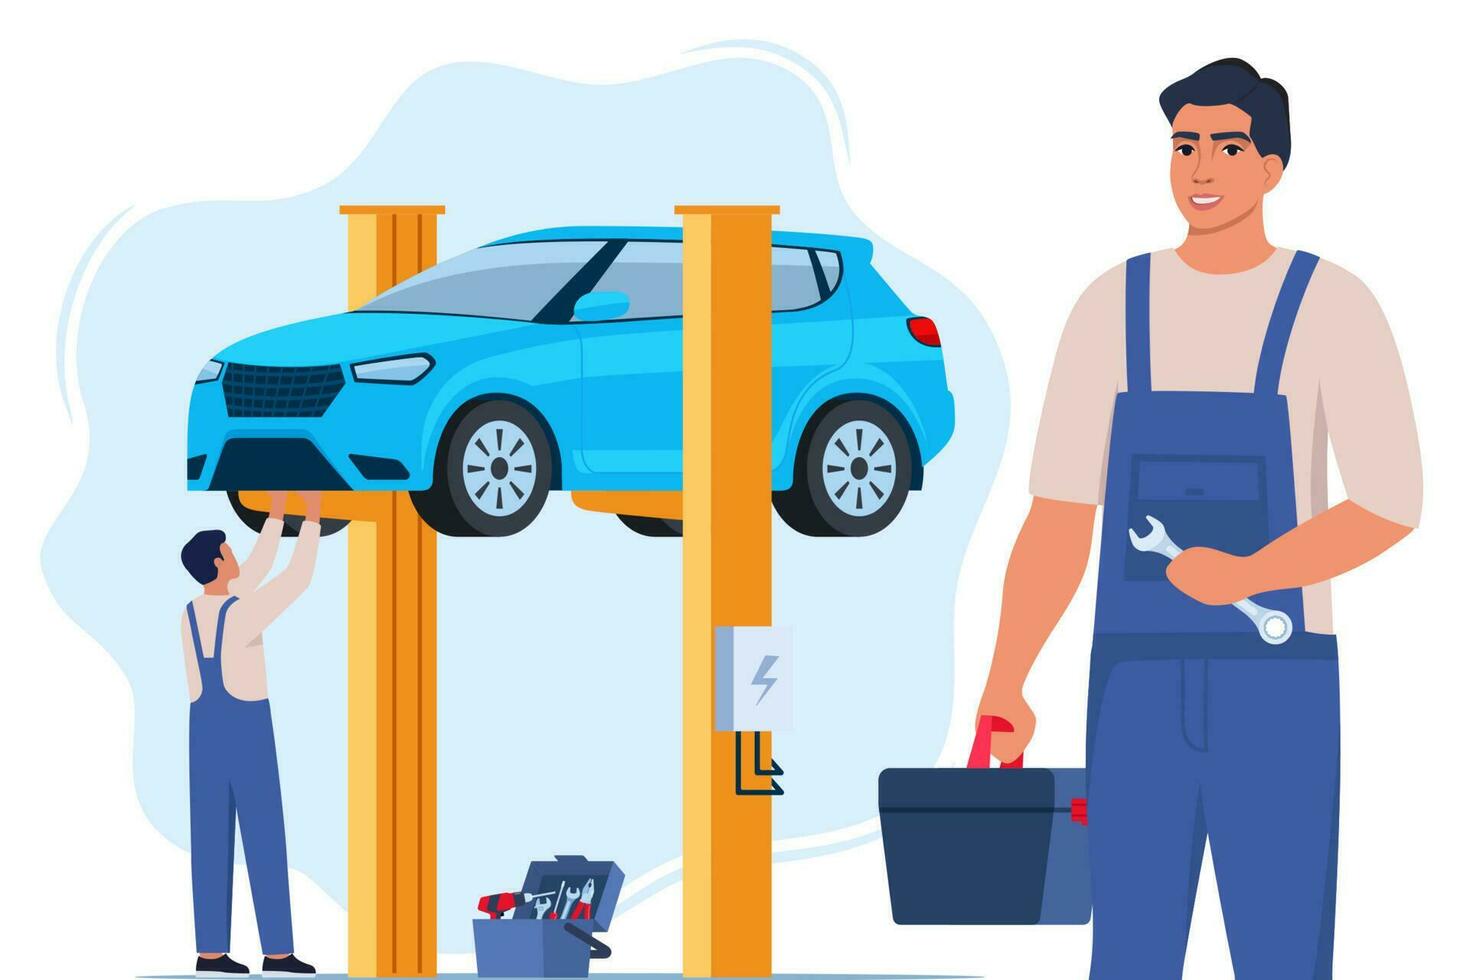 Car repair. Auto mechanic near the car lifted on autolifts. Car service and repair, diagnostics. Auto service. Vector illustration.